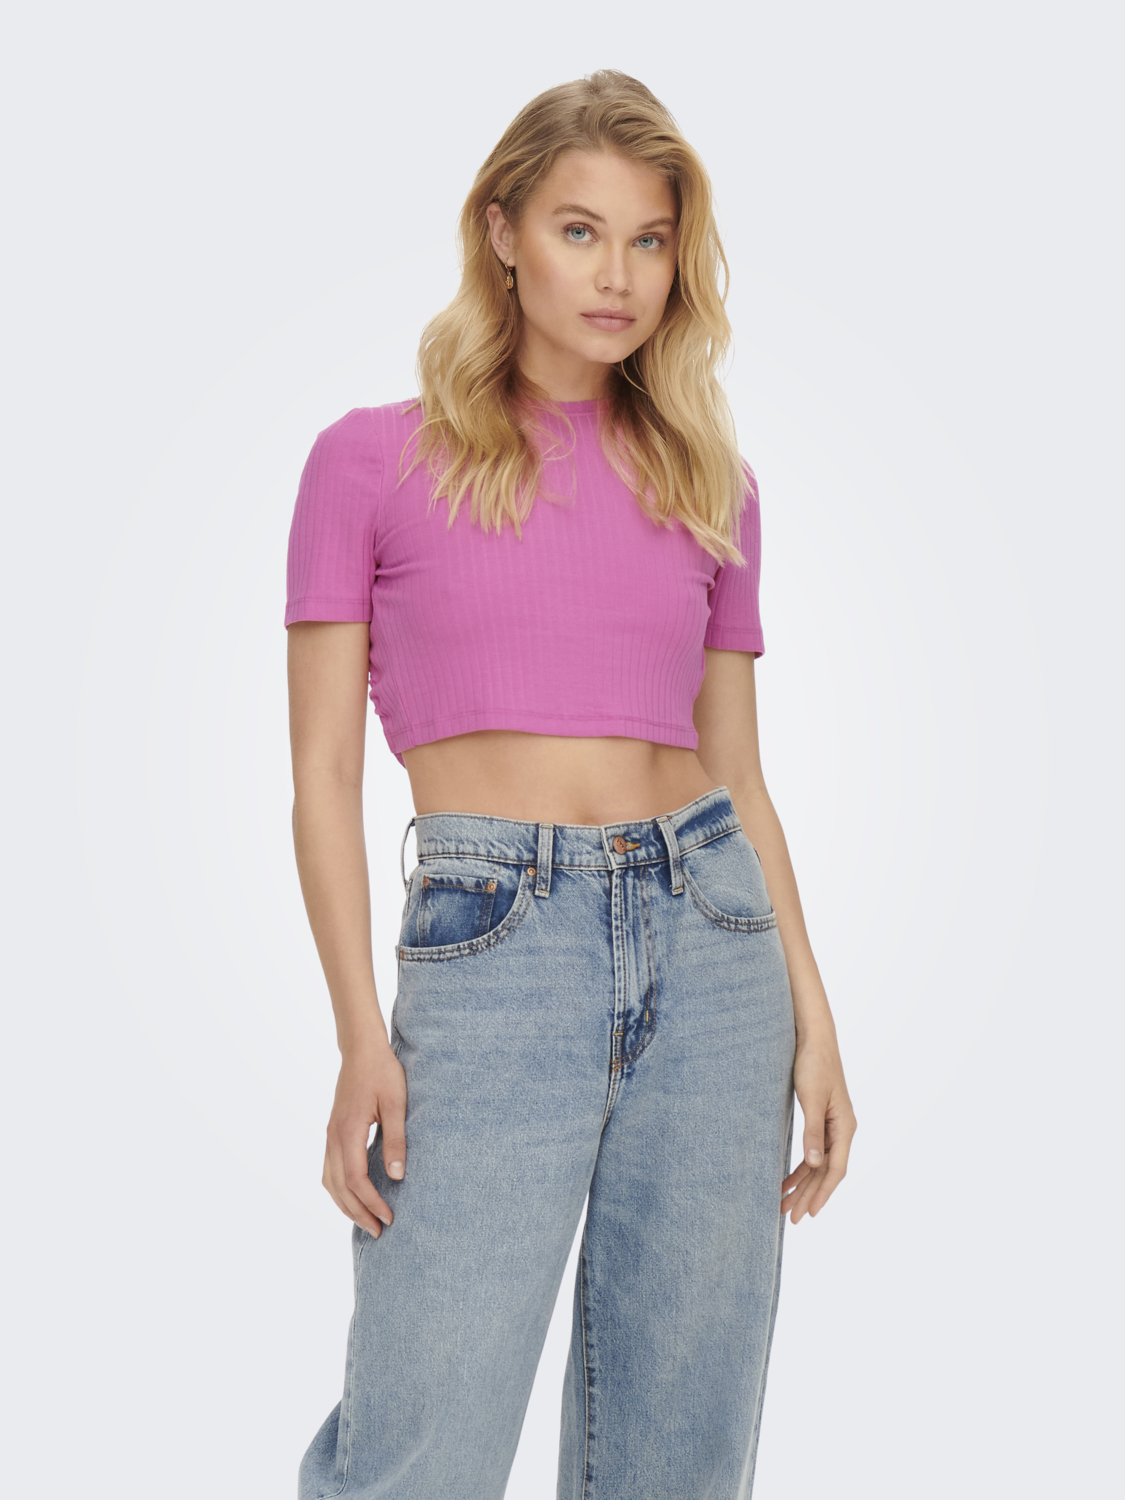 Lea open back cropped t-shirt, SUPER PINK, large